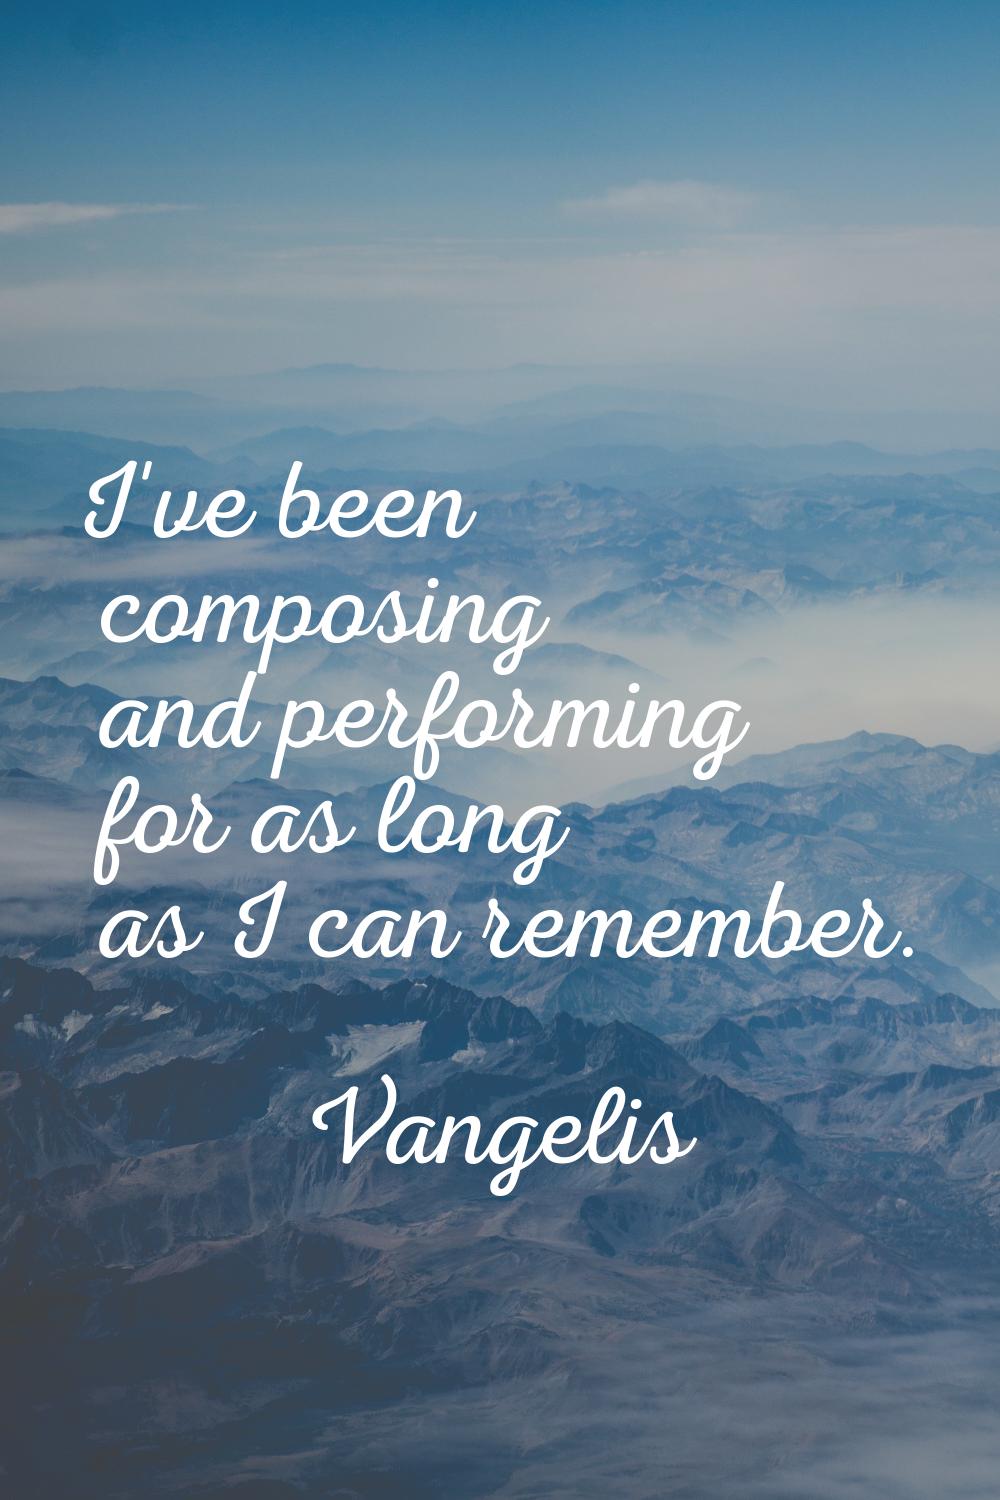 I've been composing and performing for as long as I can remember.